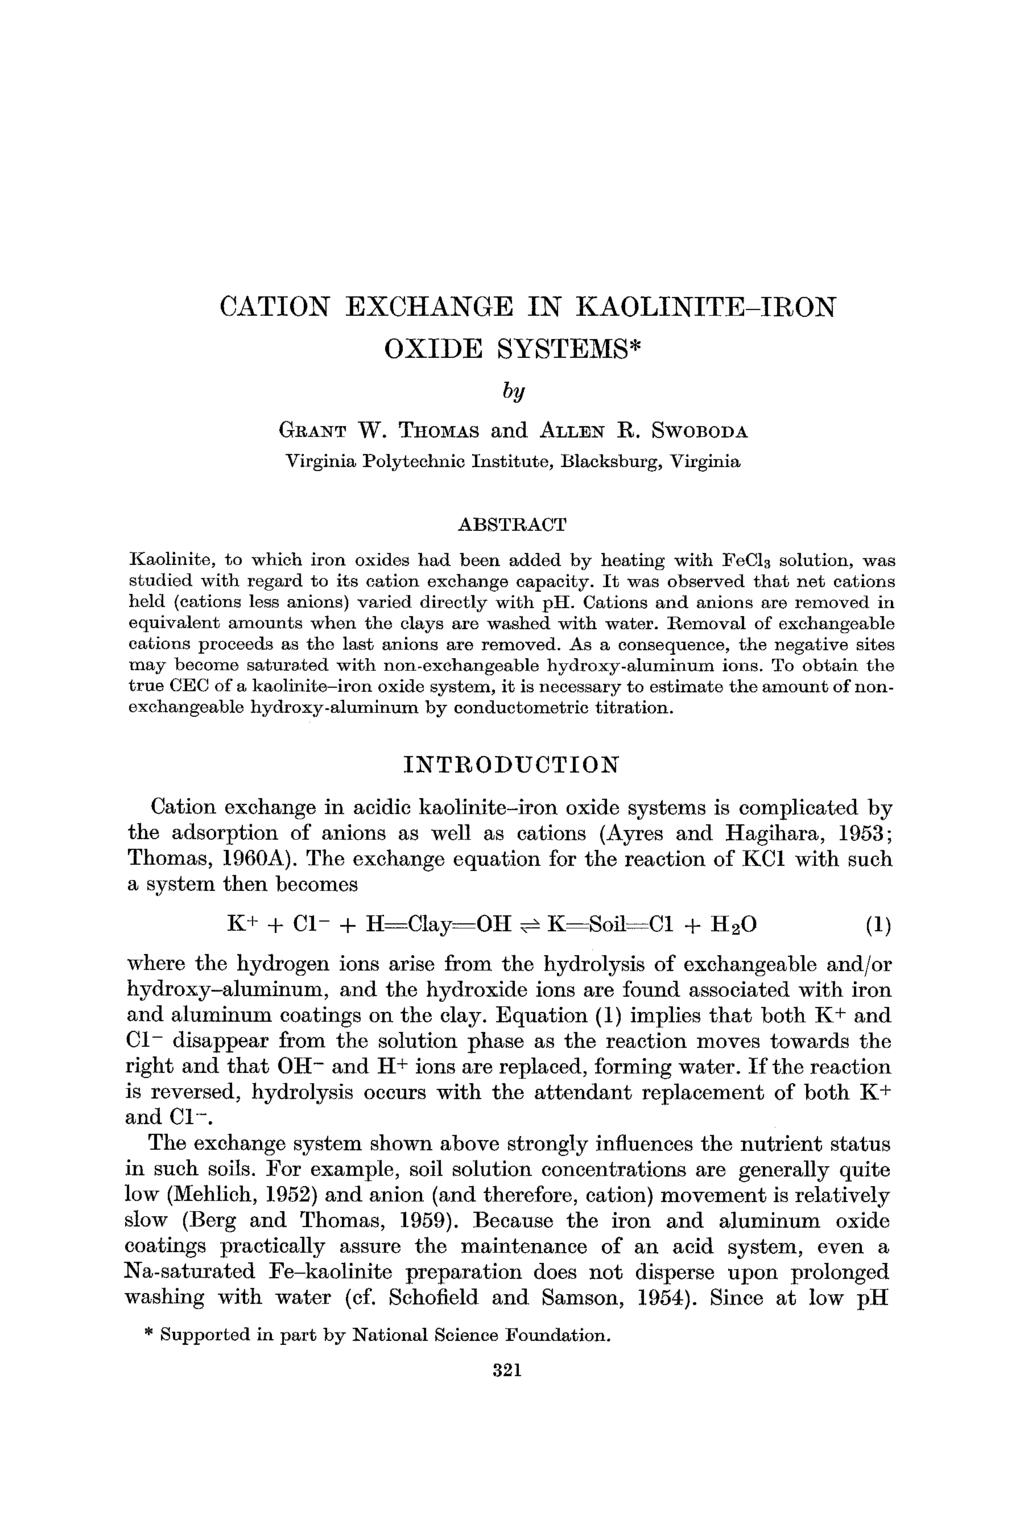 CATION EXCHANGE IN KAOLINITE-IRON OXIDE SYSTEMS* by GRANT W. THOMAS and ALLEN R.